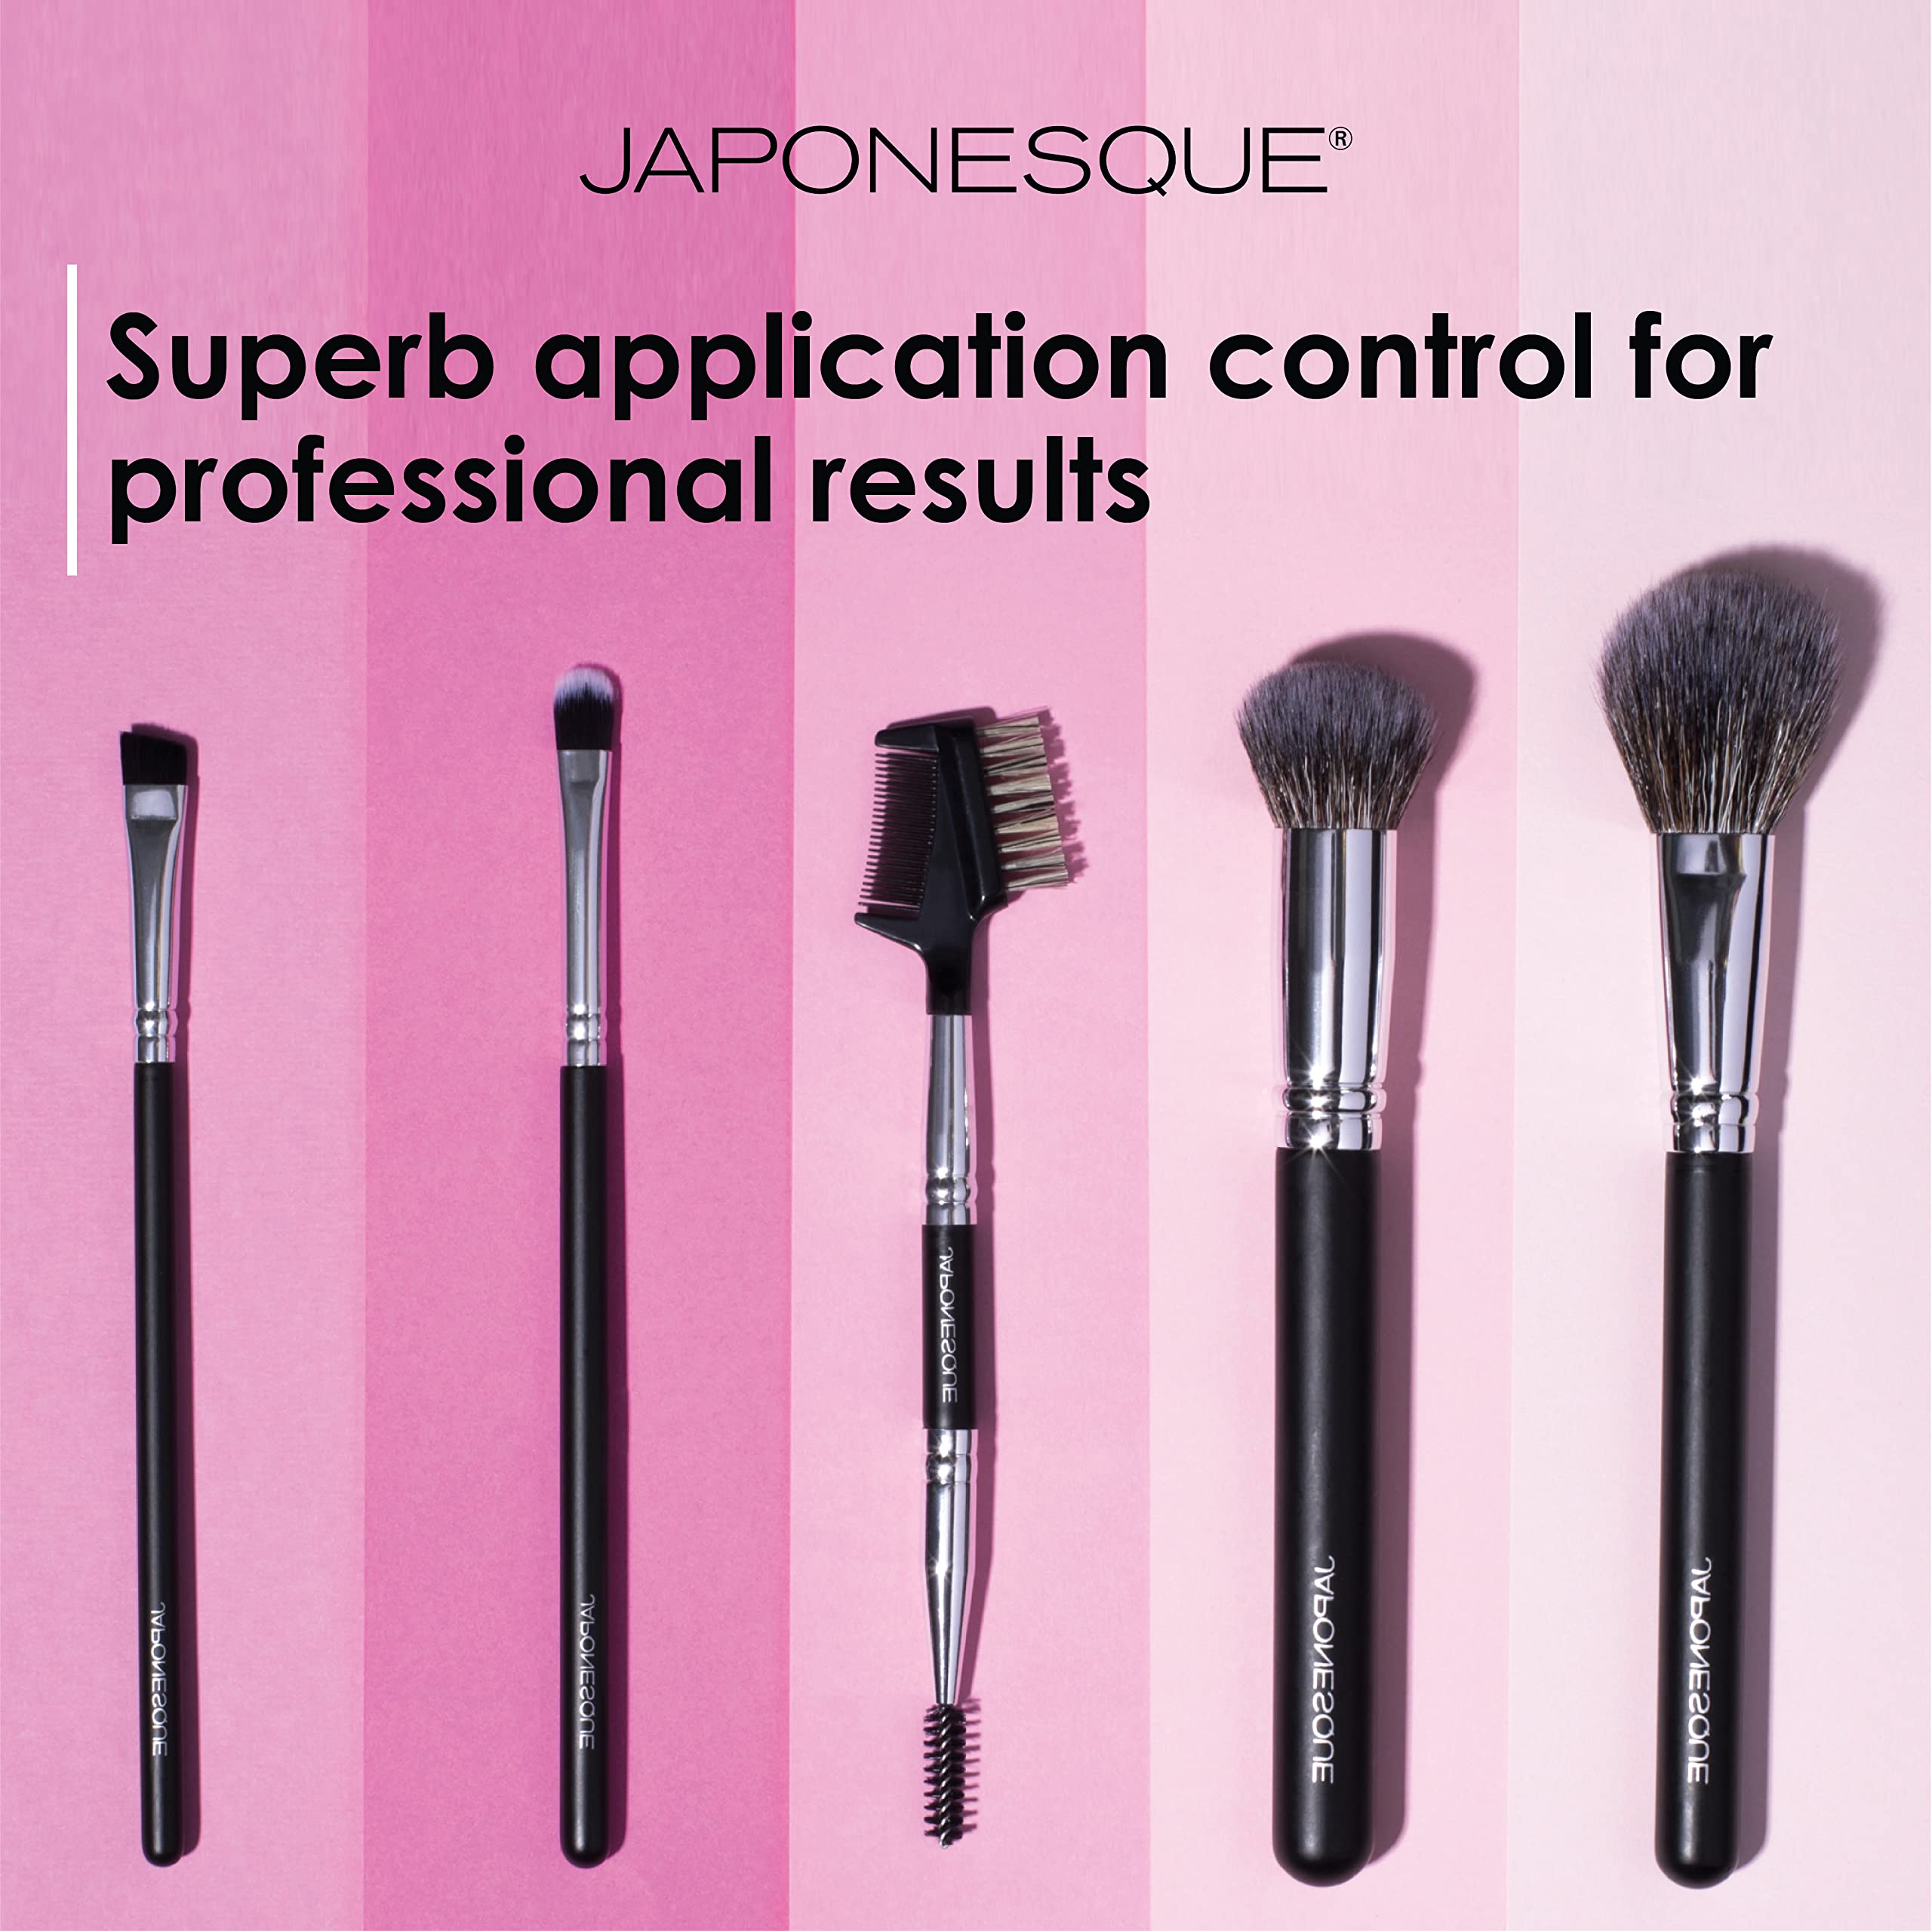 JAPONESQUE Brow & Lash Shaper with 3 Different Spoolie Brushes, for Separating Lashes, Eliminating Mascara Clumps, and Grooming and Shaping Brows